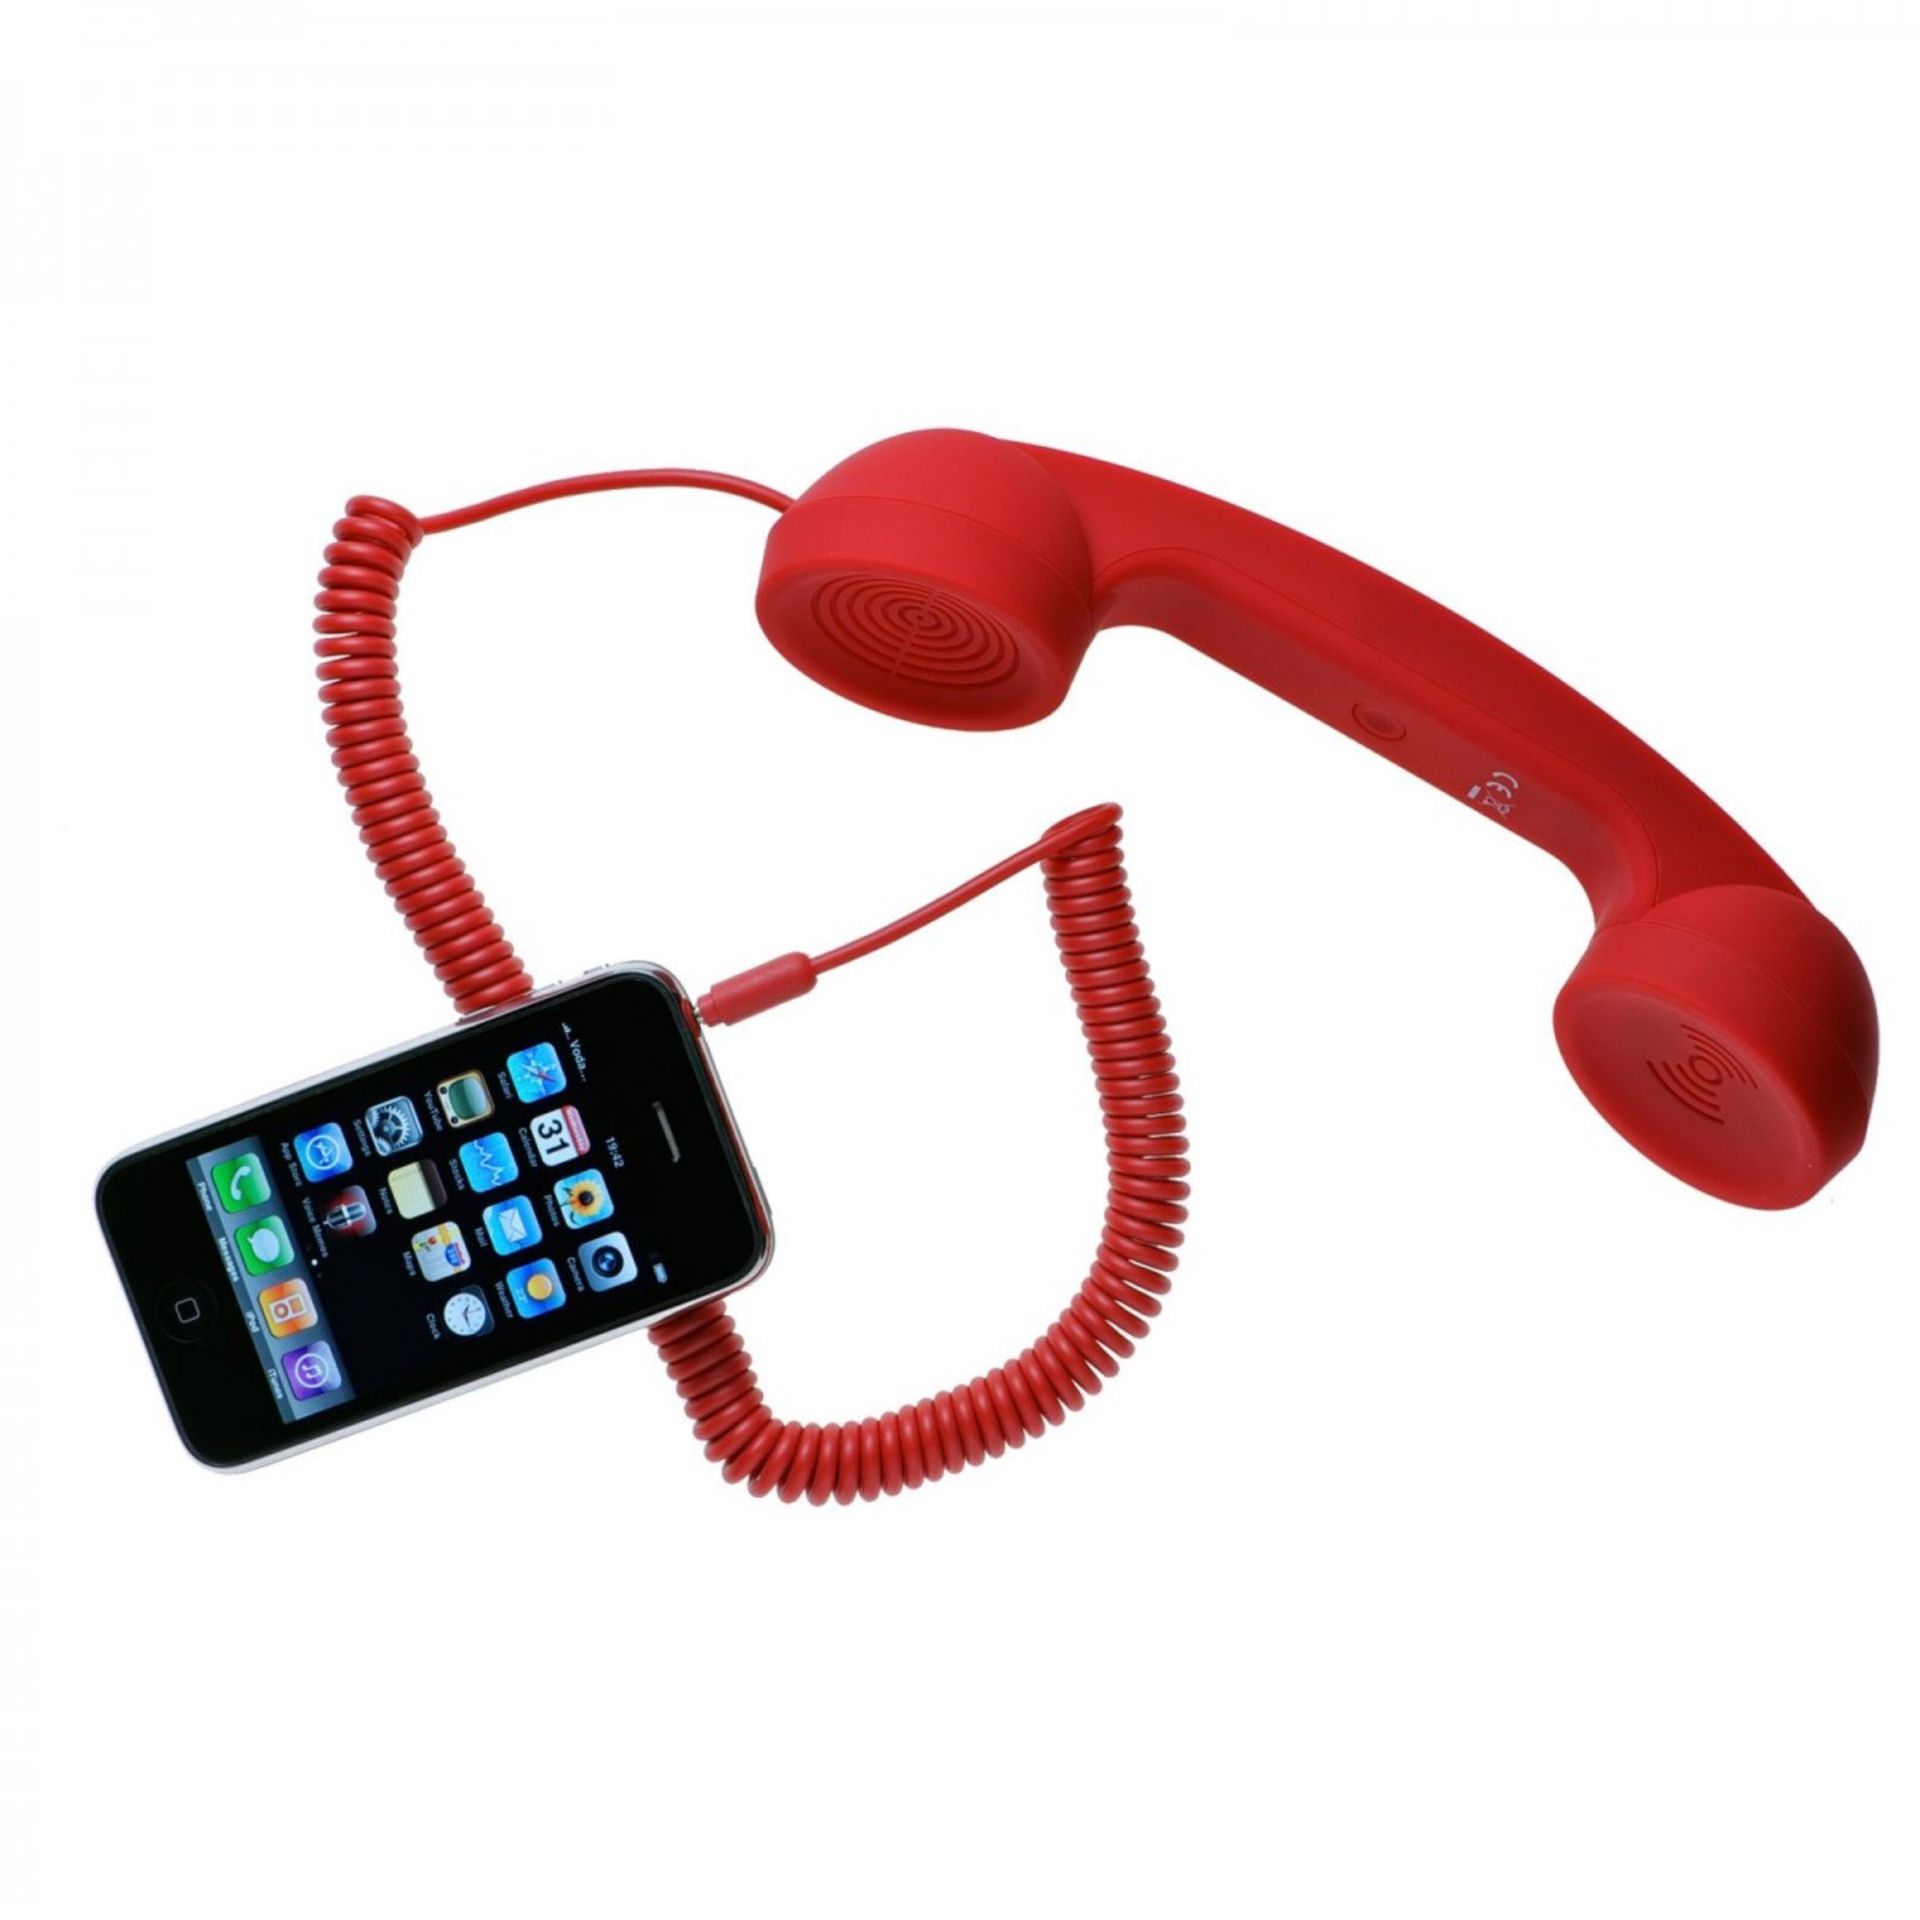 V Brand New Red Retro Phone Handset - 3.5mm Jack - Compatible With iPhone & iPad - Laptops & Desktop